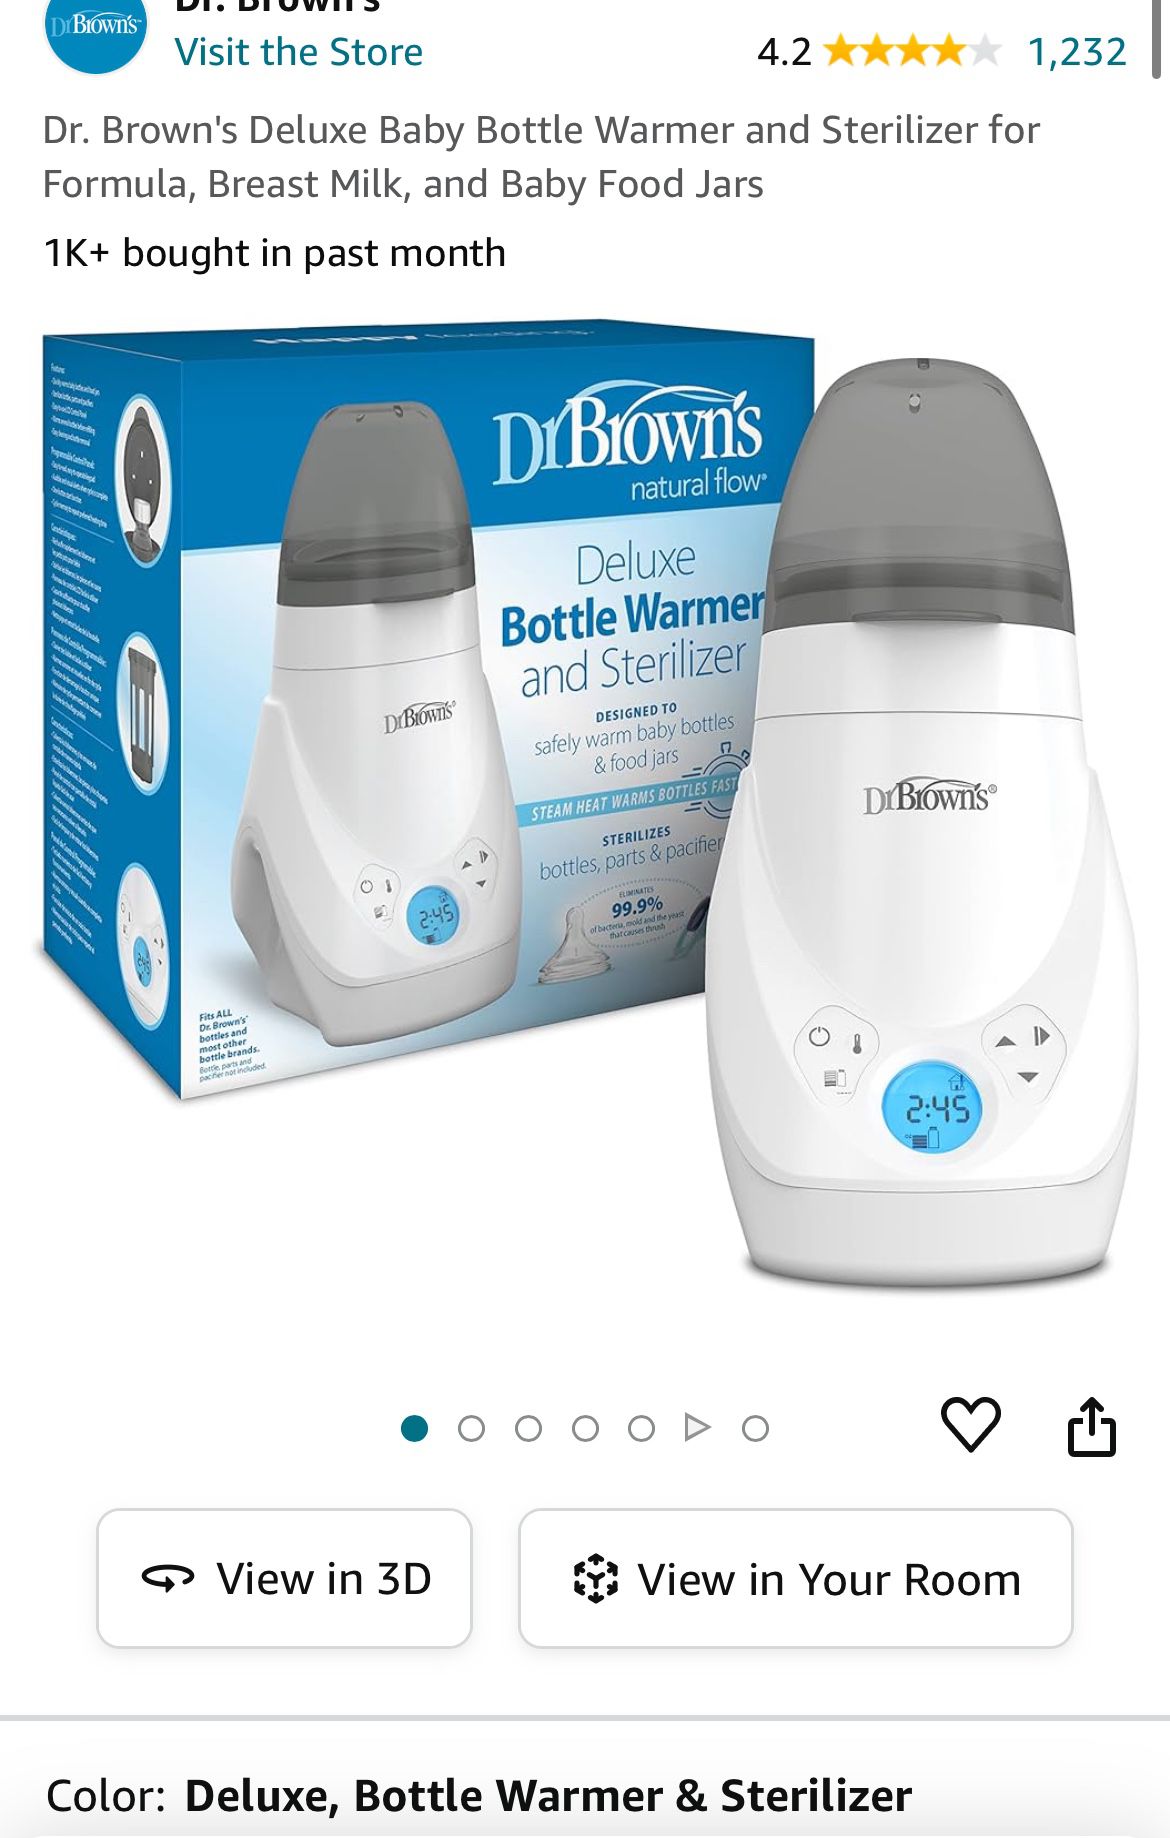 Dr. Brown's Deluxe Baby Bottle Warmer and Sterilizer 